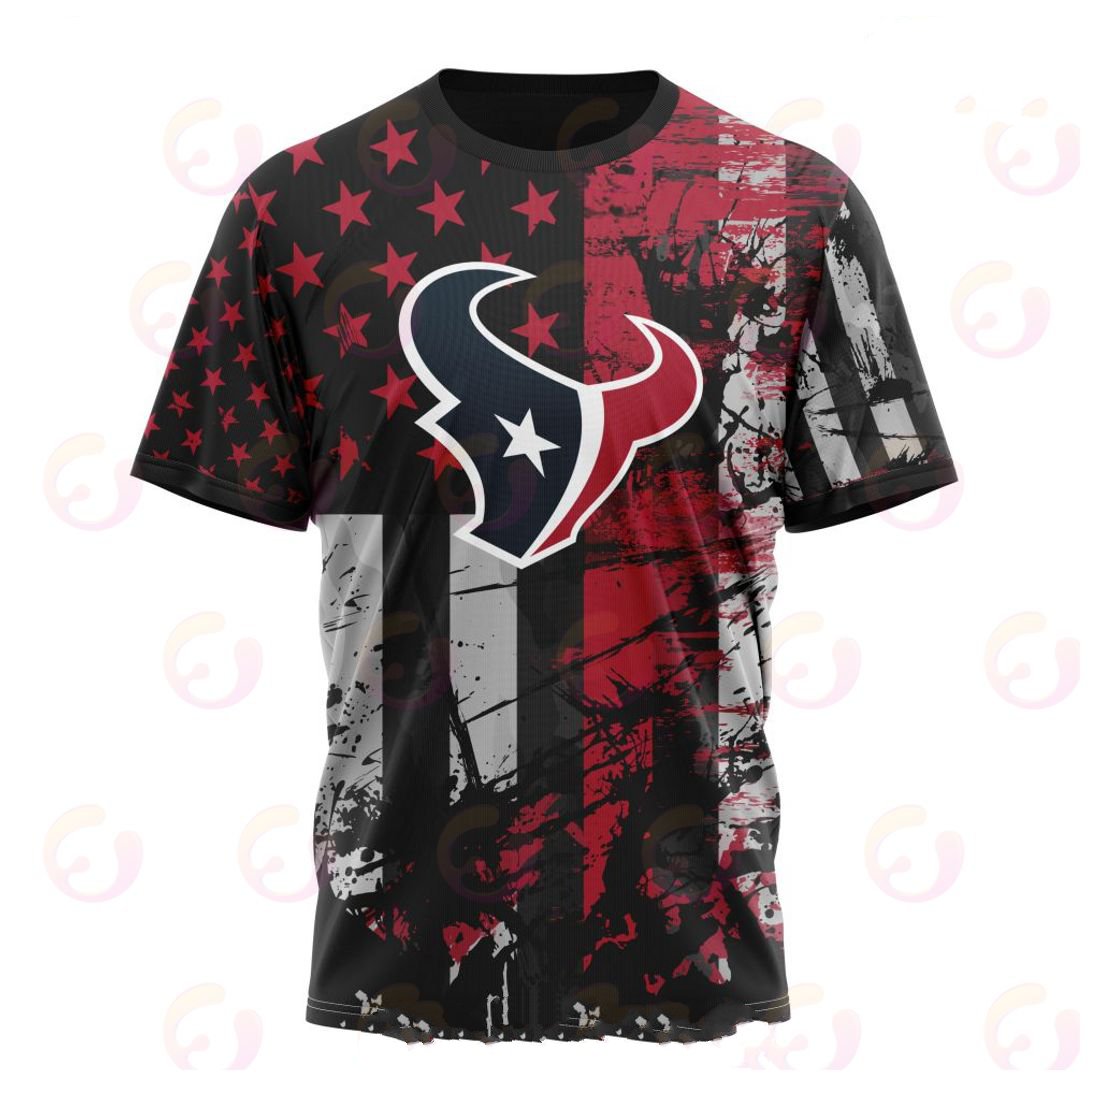 HOUSTON TEXANS 3D HOODIE JERSEY FOR AMERICA